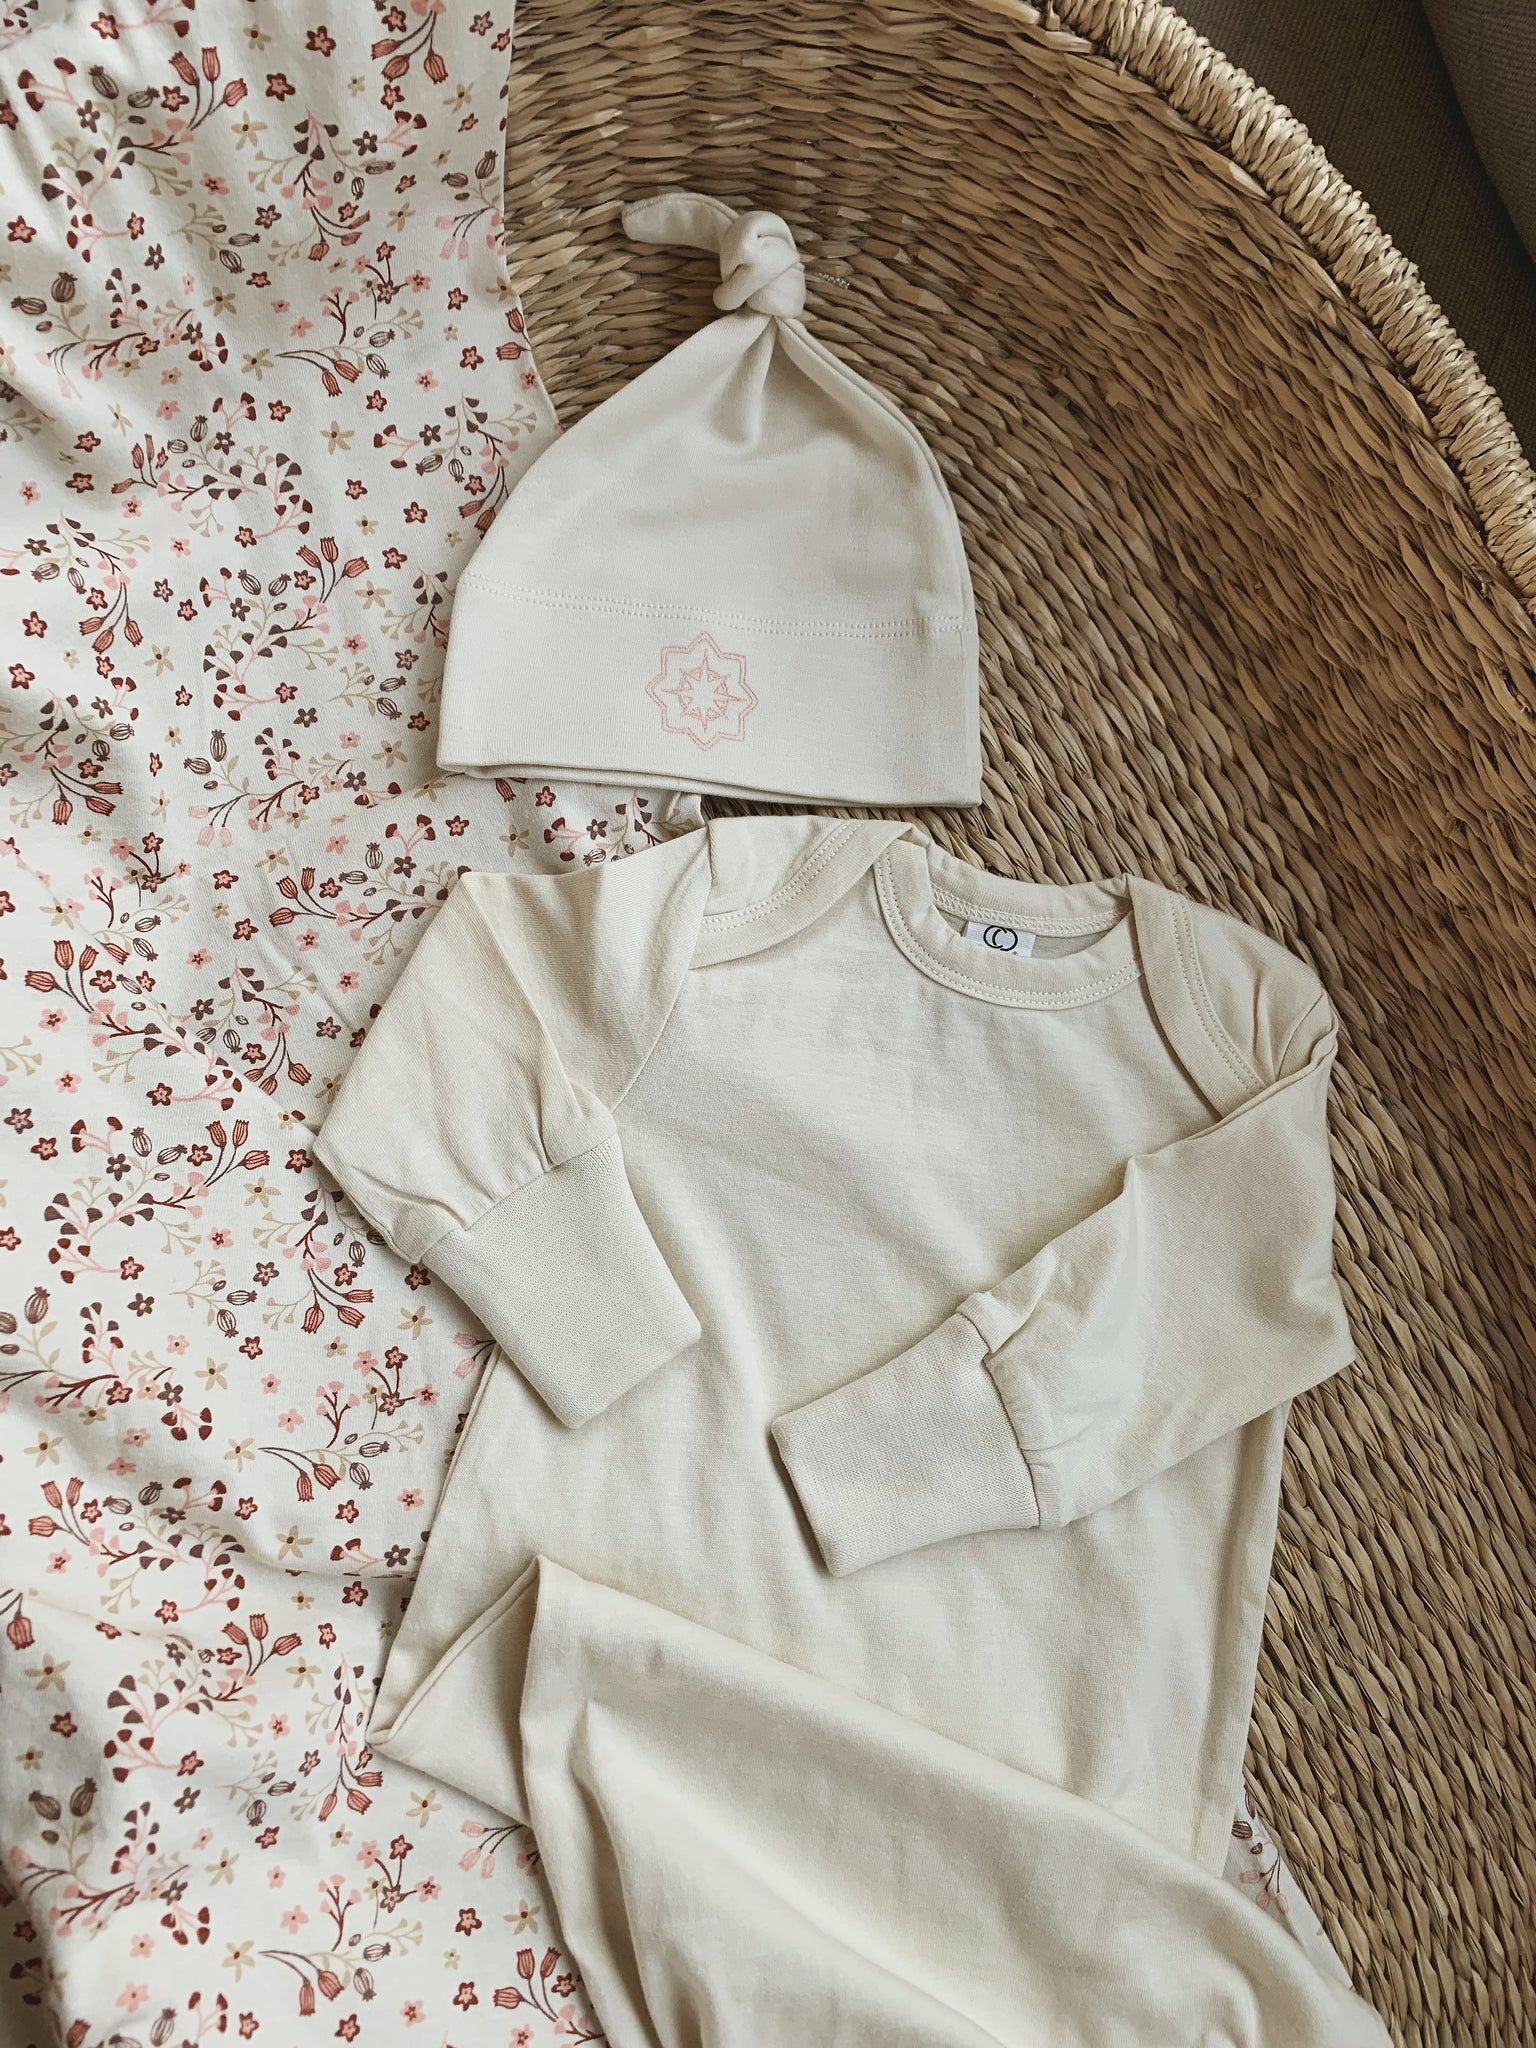 Organic Sleeper, Hat, and Swaddle Set in Cream & Floral ONE LEFT!